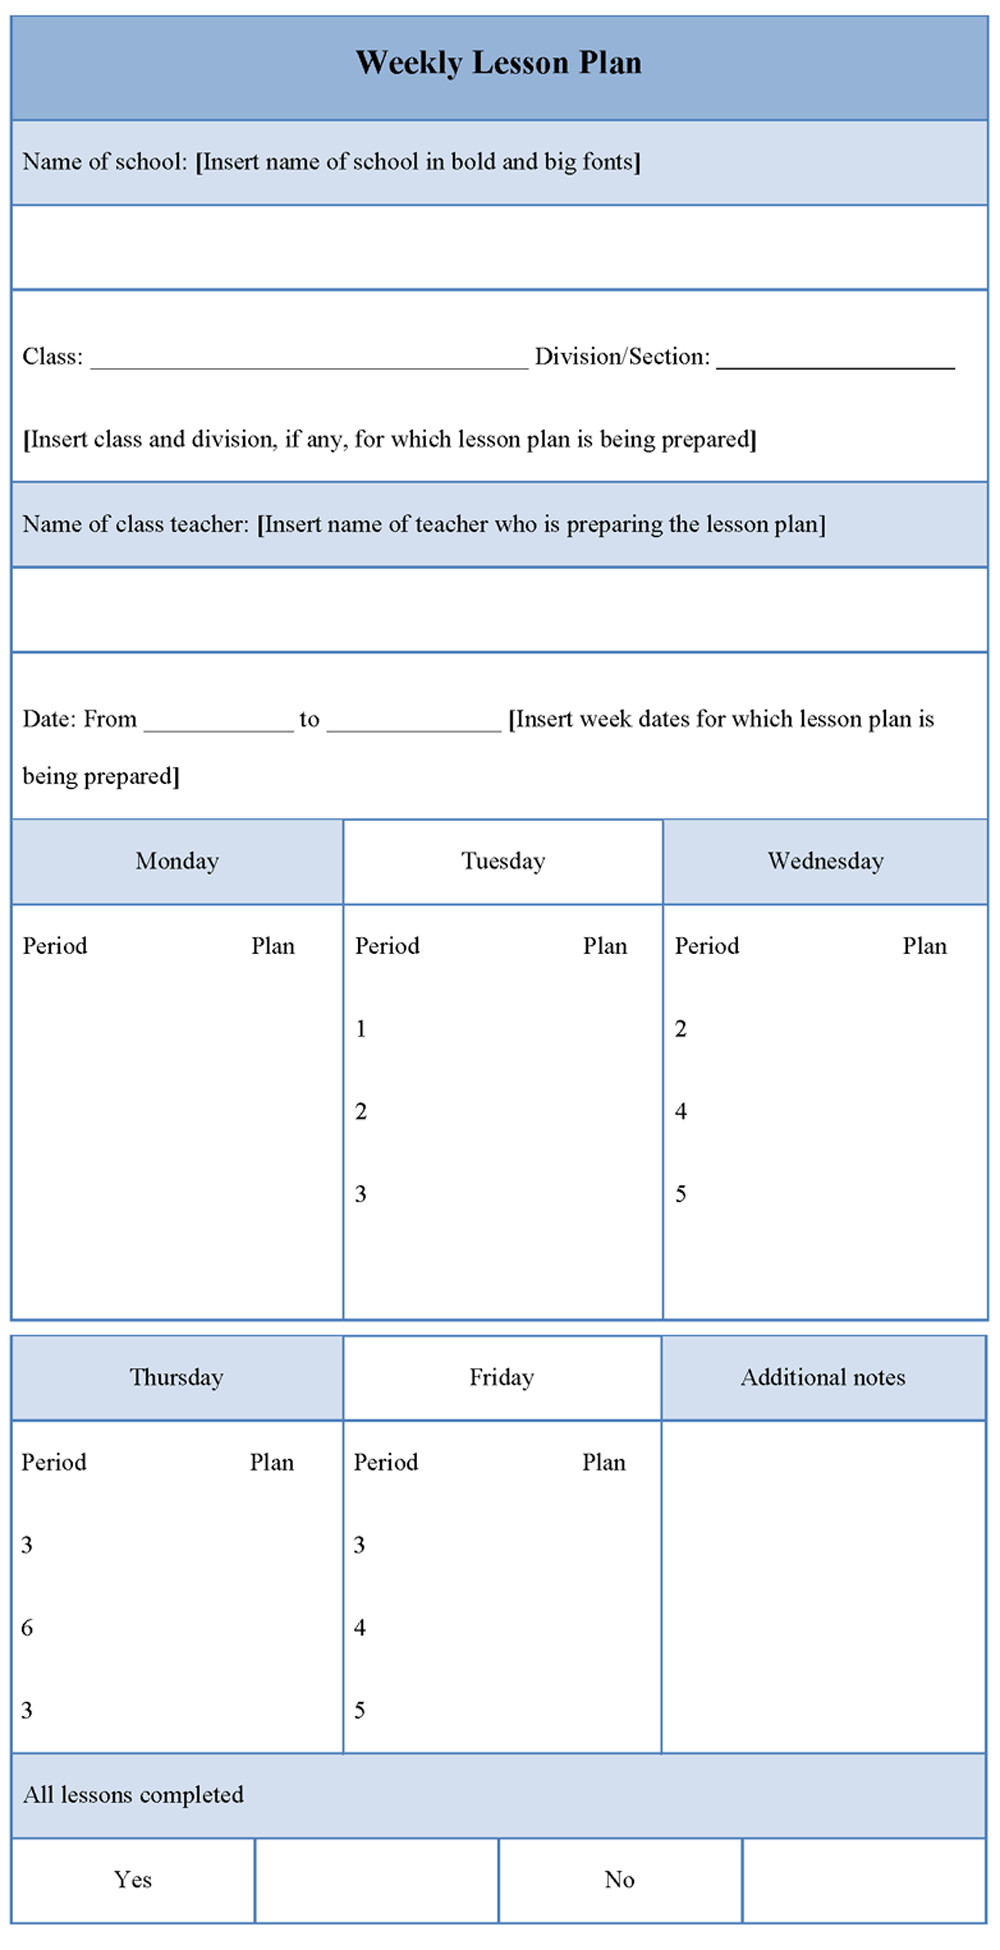 Weekly Lesson Plan Template Plan Template for Weekly Lesson Sample Of Weekly Lesson